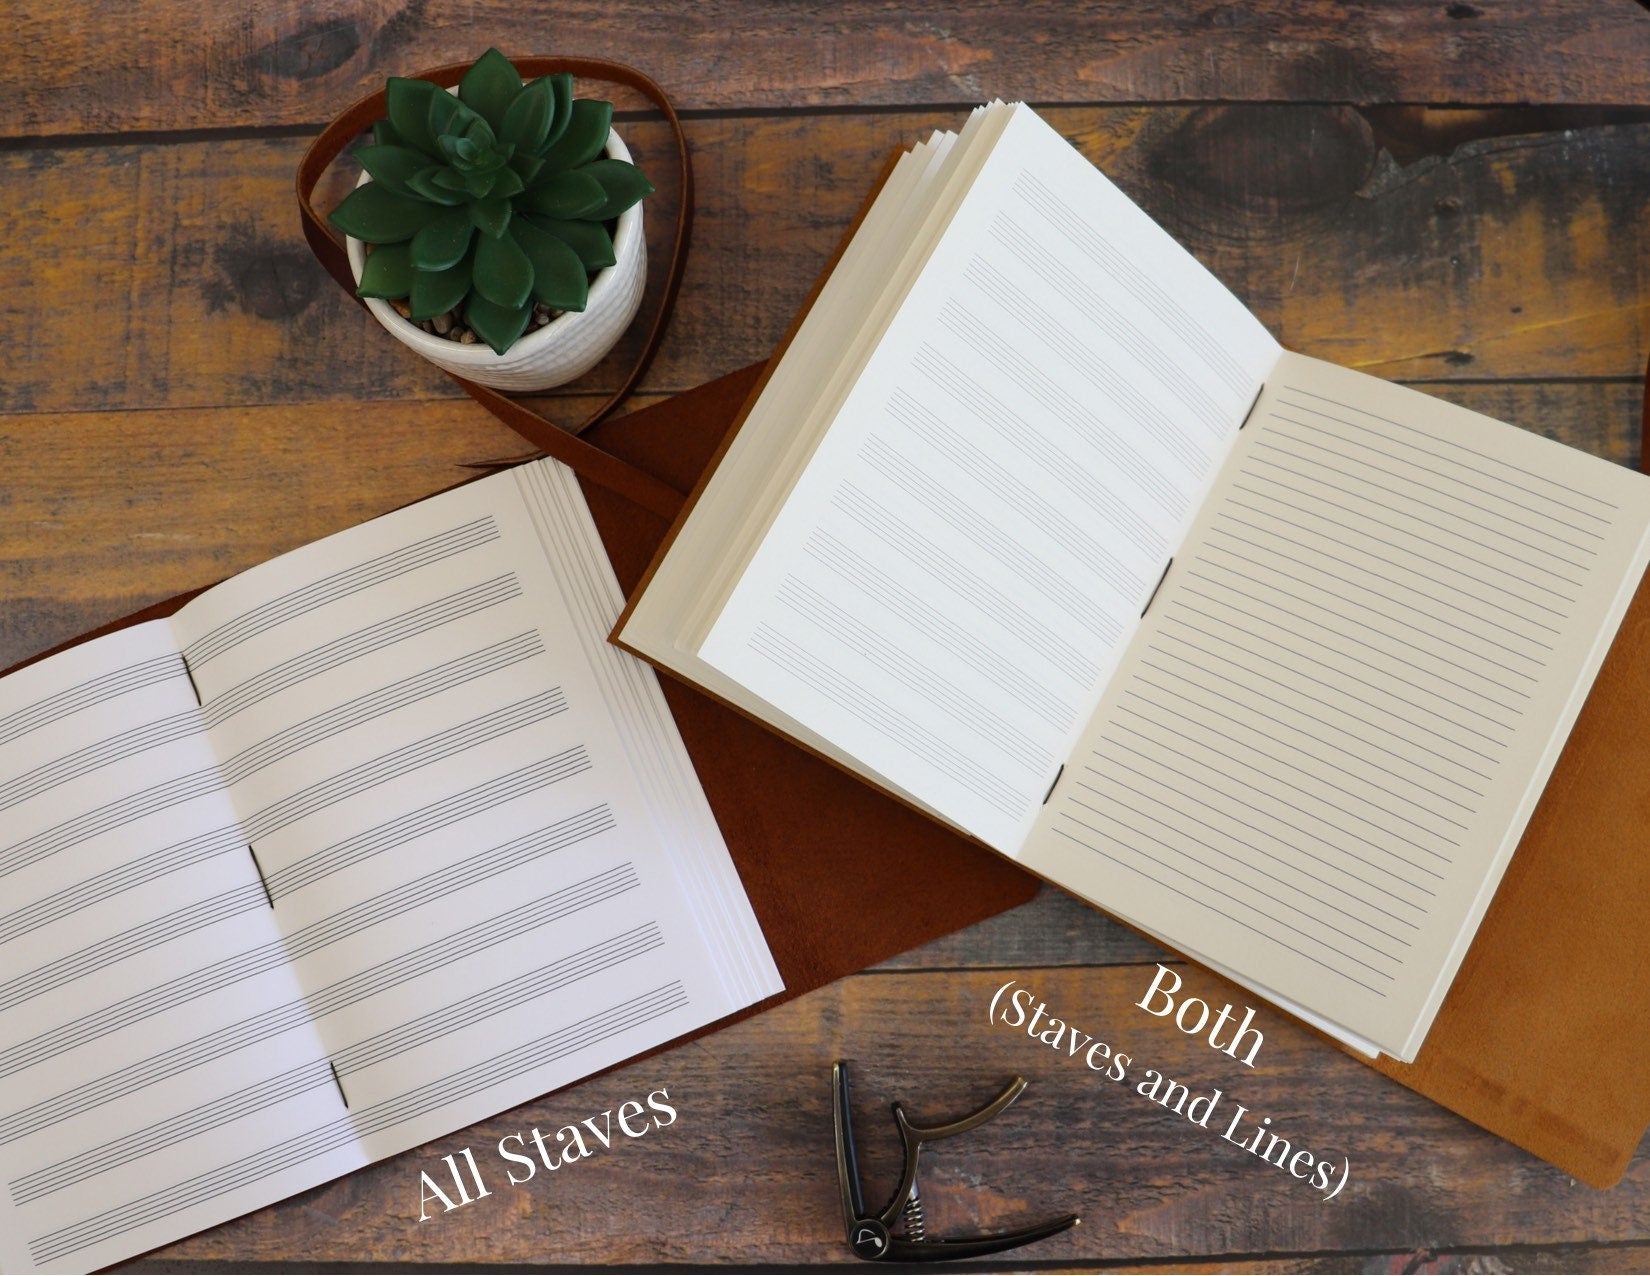 Leather Music Journal, Rustic Songwriting Book, Personalized Gift for Musicians, Songwriters and Composers, Sewn Bound in Full Grain Leather